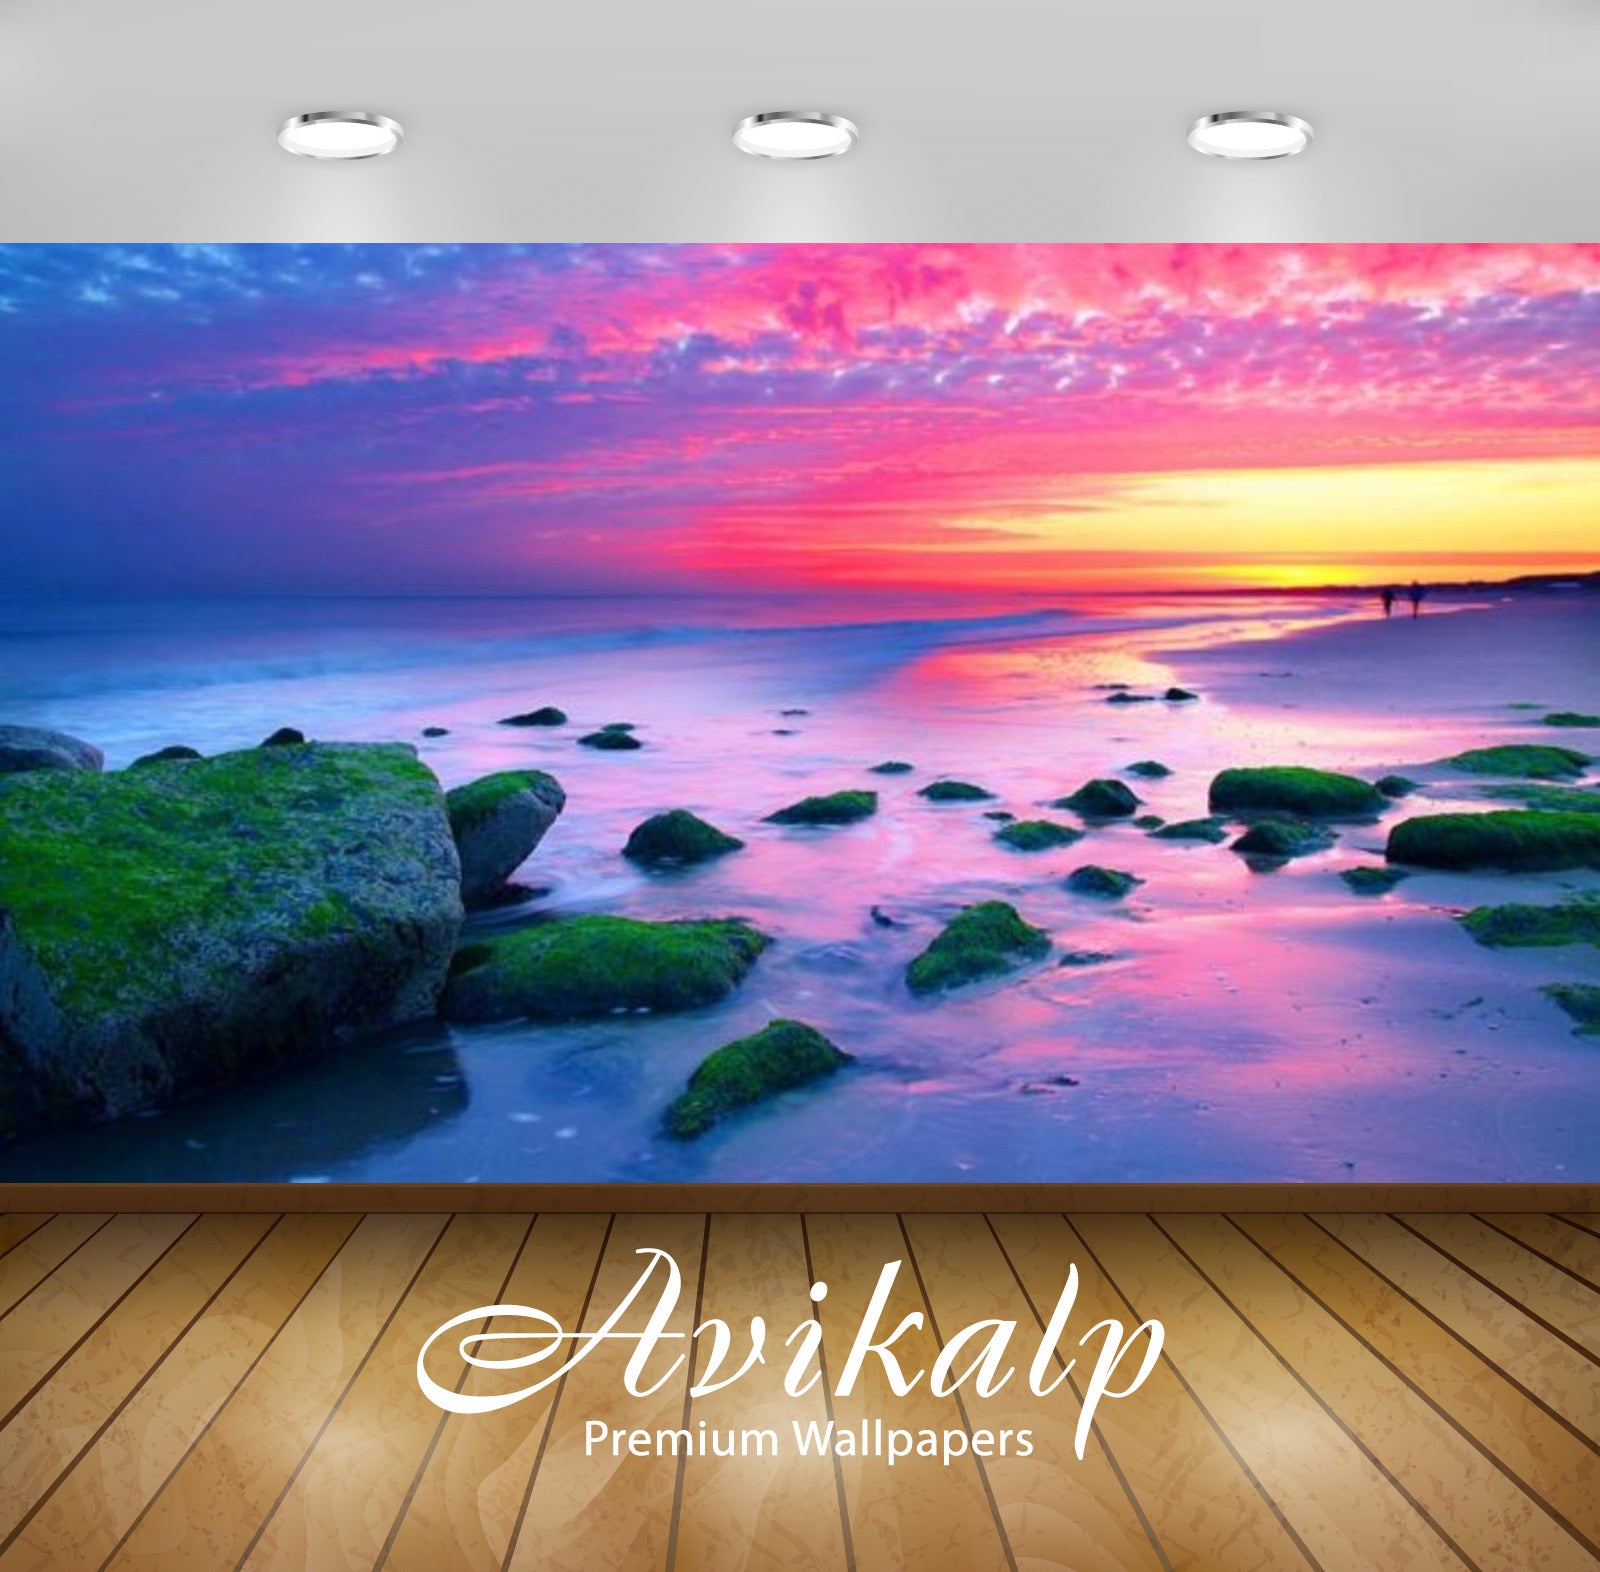 Avikalp Exclusive Awi2847 Nature Landscapes Sunset The Hague Netherlands Sea Coast Rocks Red Sky Ful